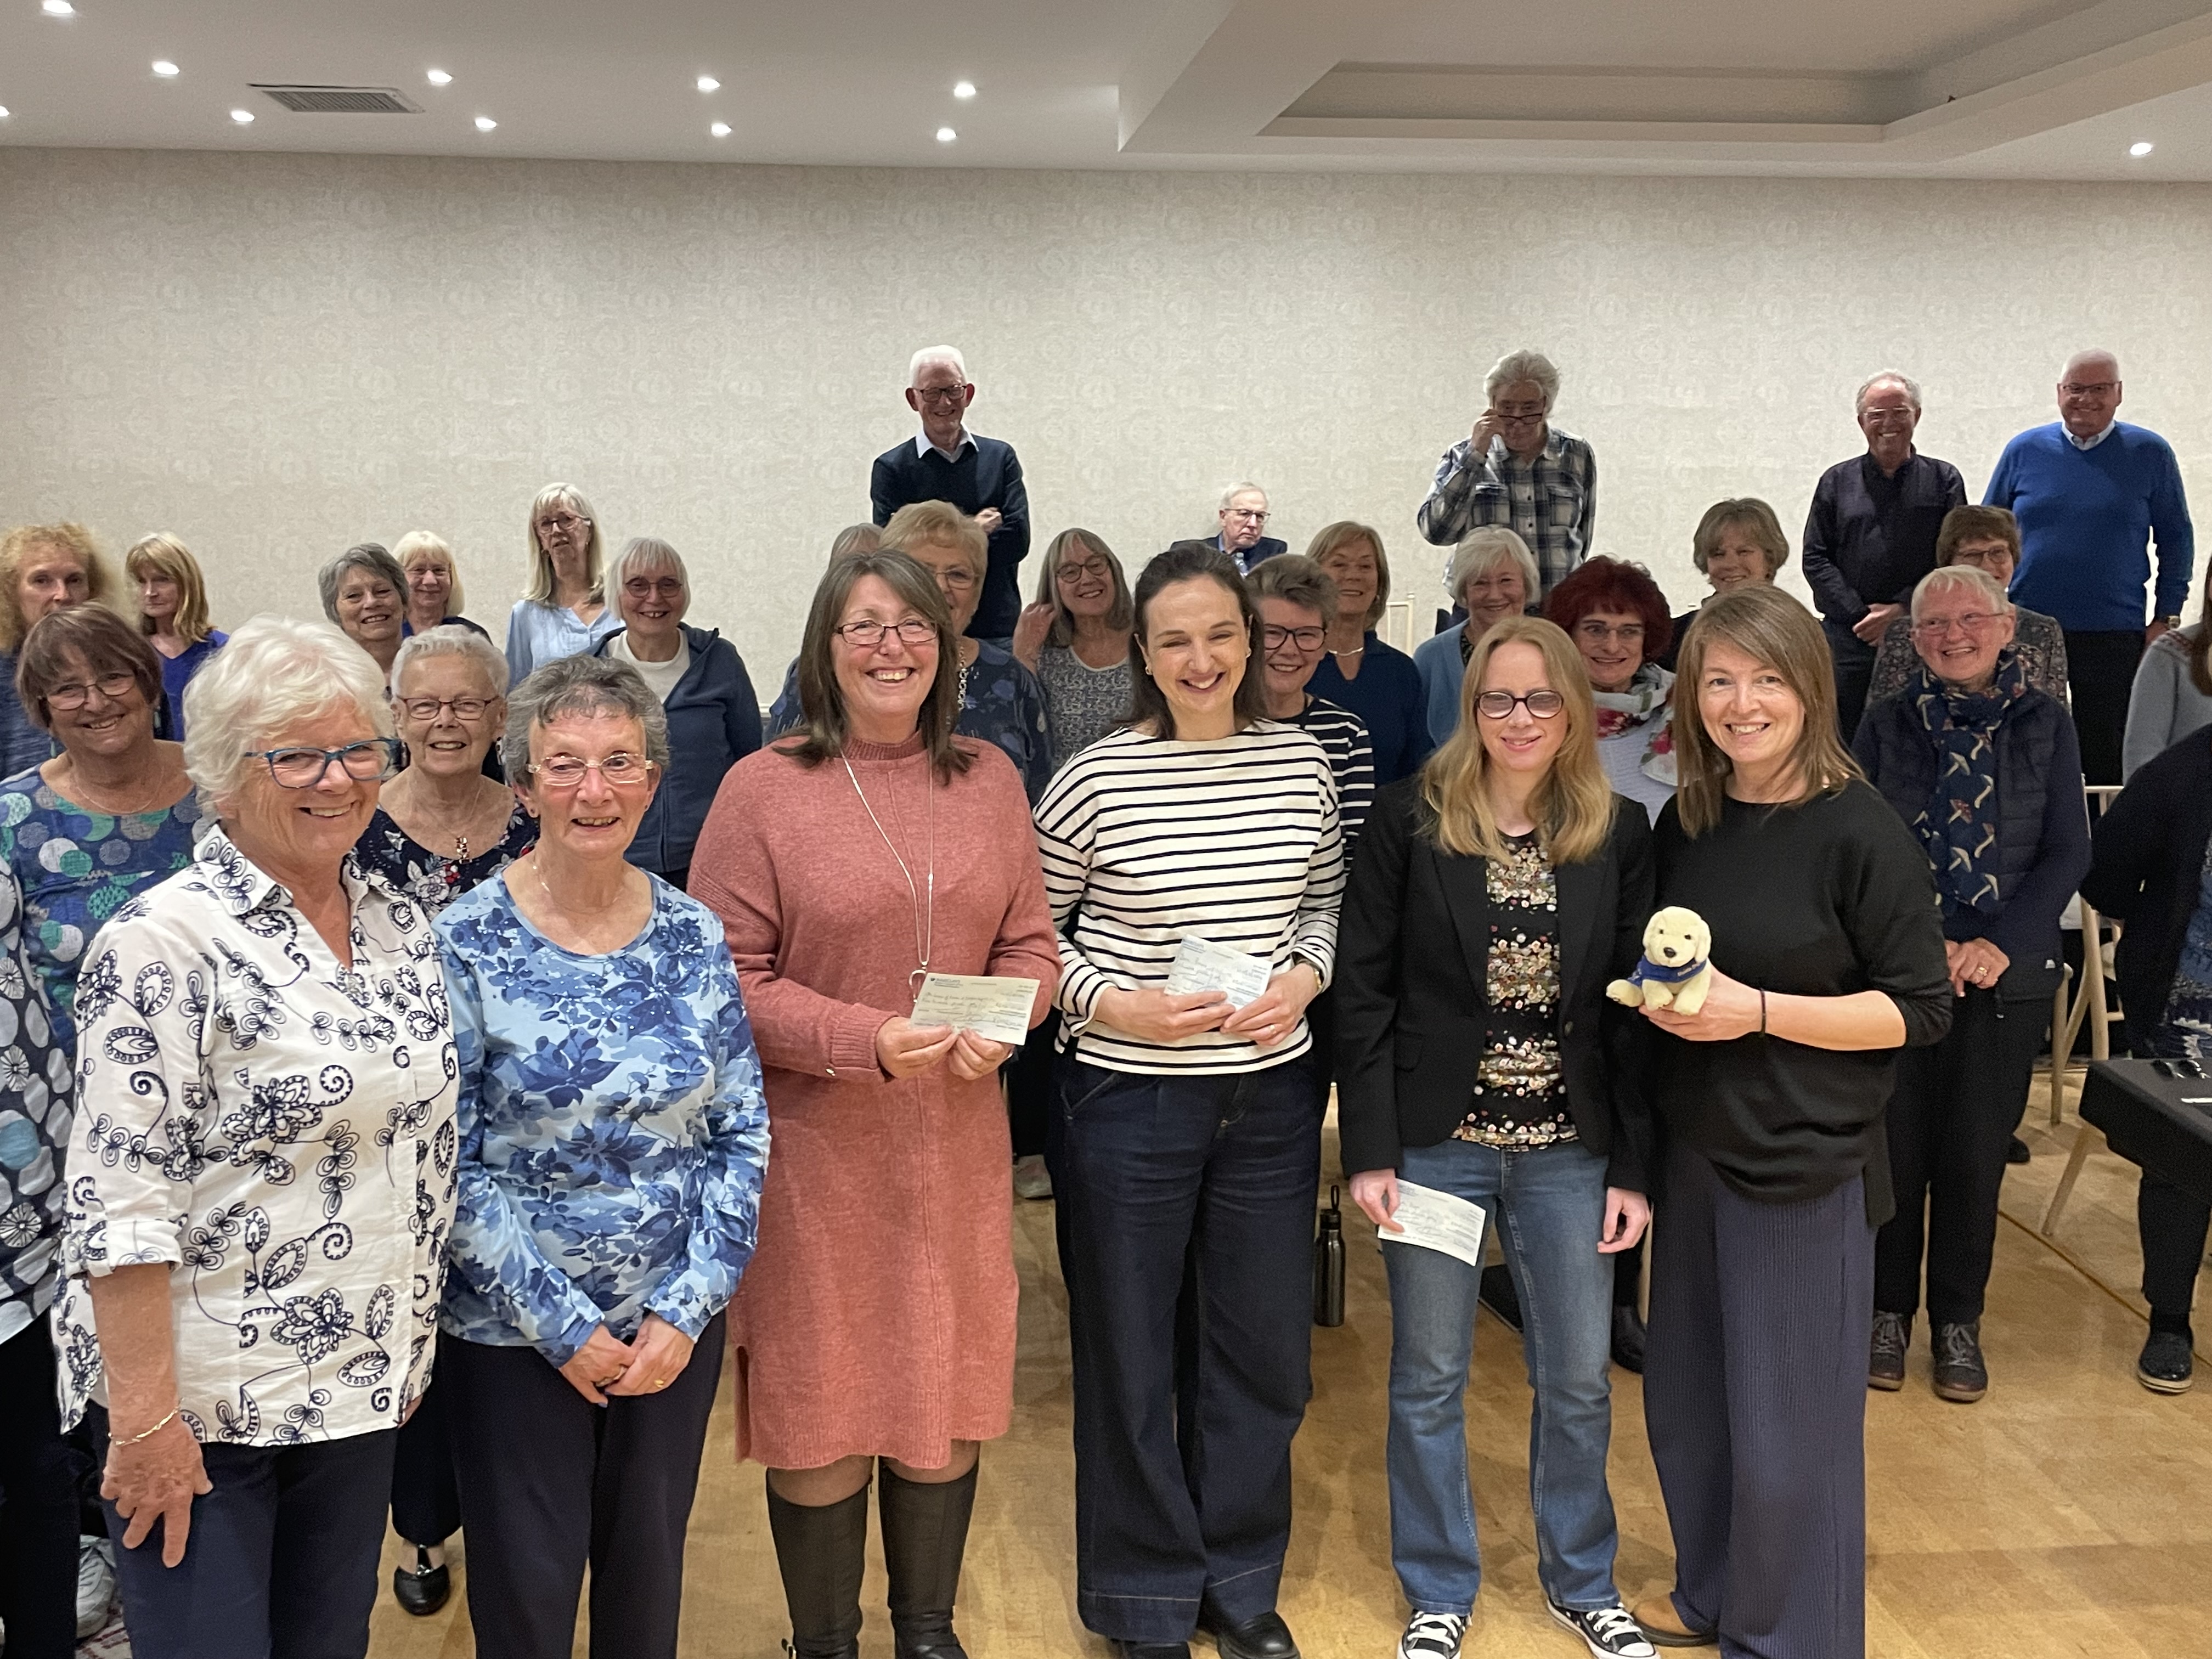 Choir donates another £2000 to local charities, bringing the total to £38,500